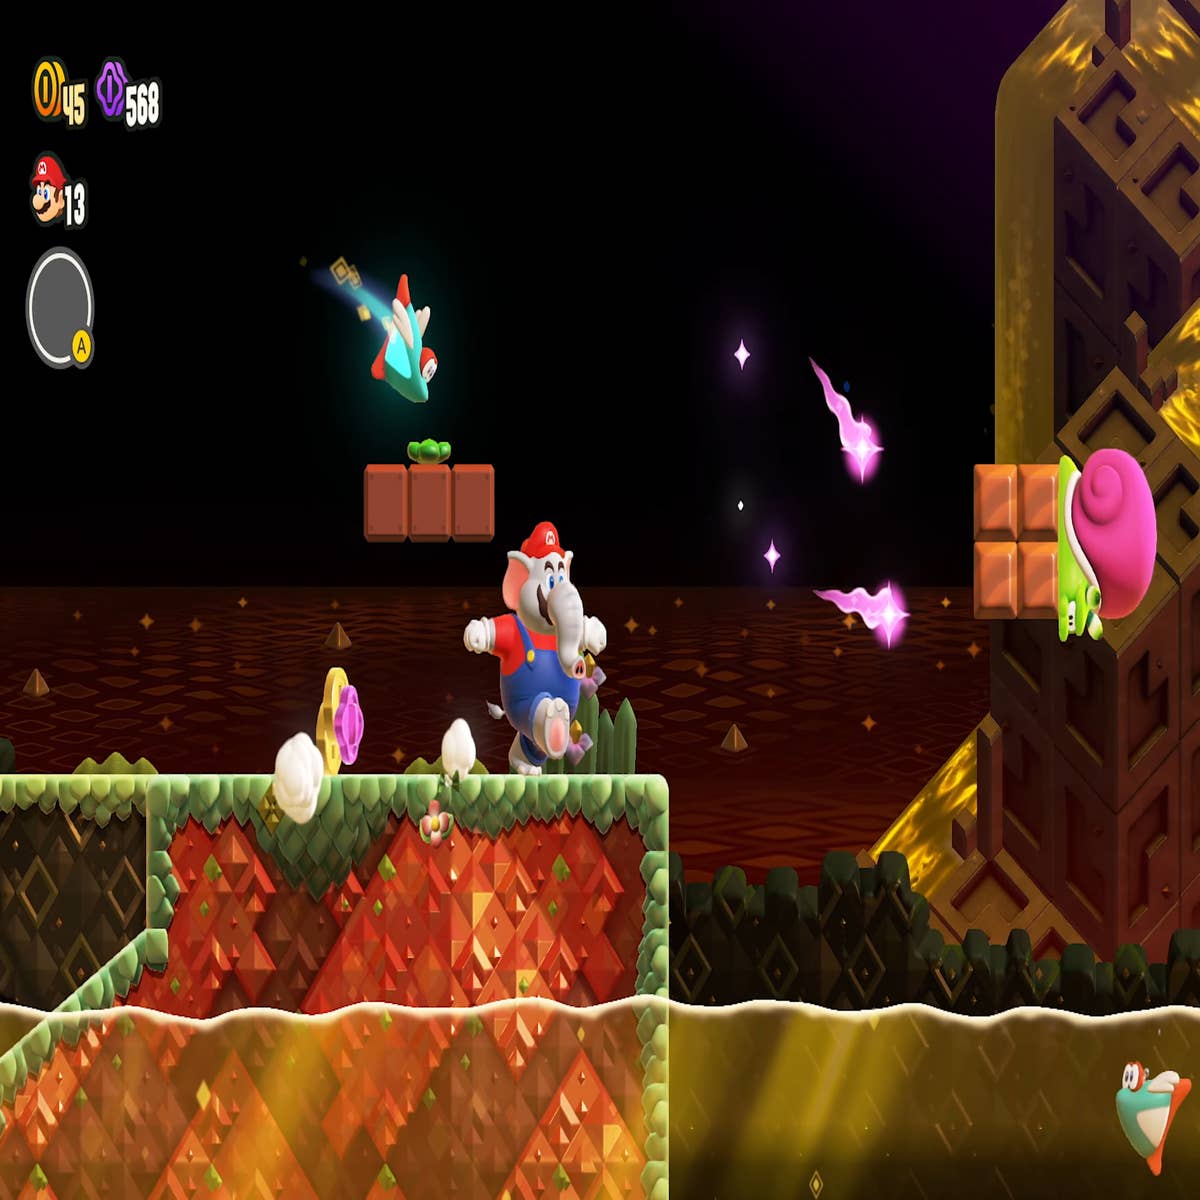 Wonder' brings welcomed changes to the Super Mario Bros. universe